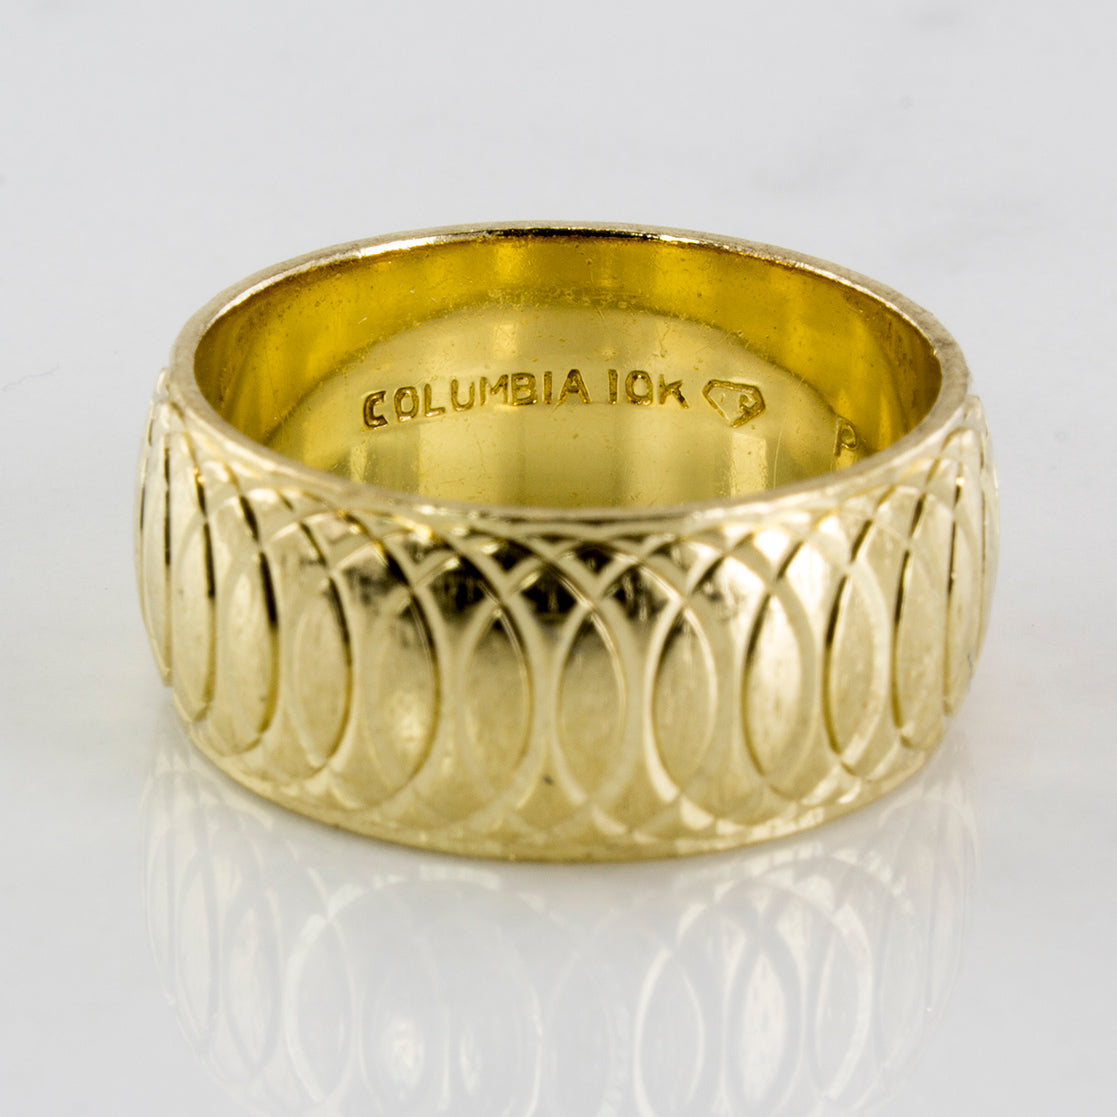 Engraved Patterned Wide Gold Band | SZ 5.25 |